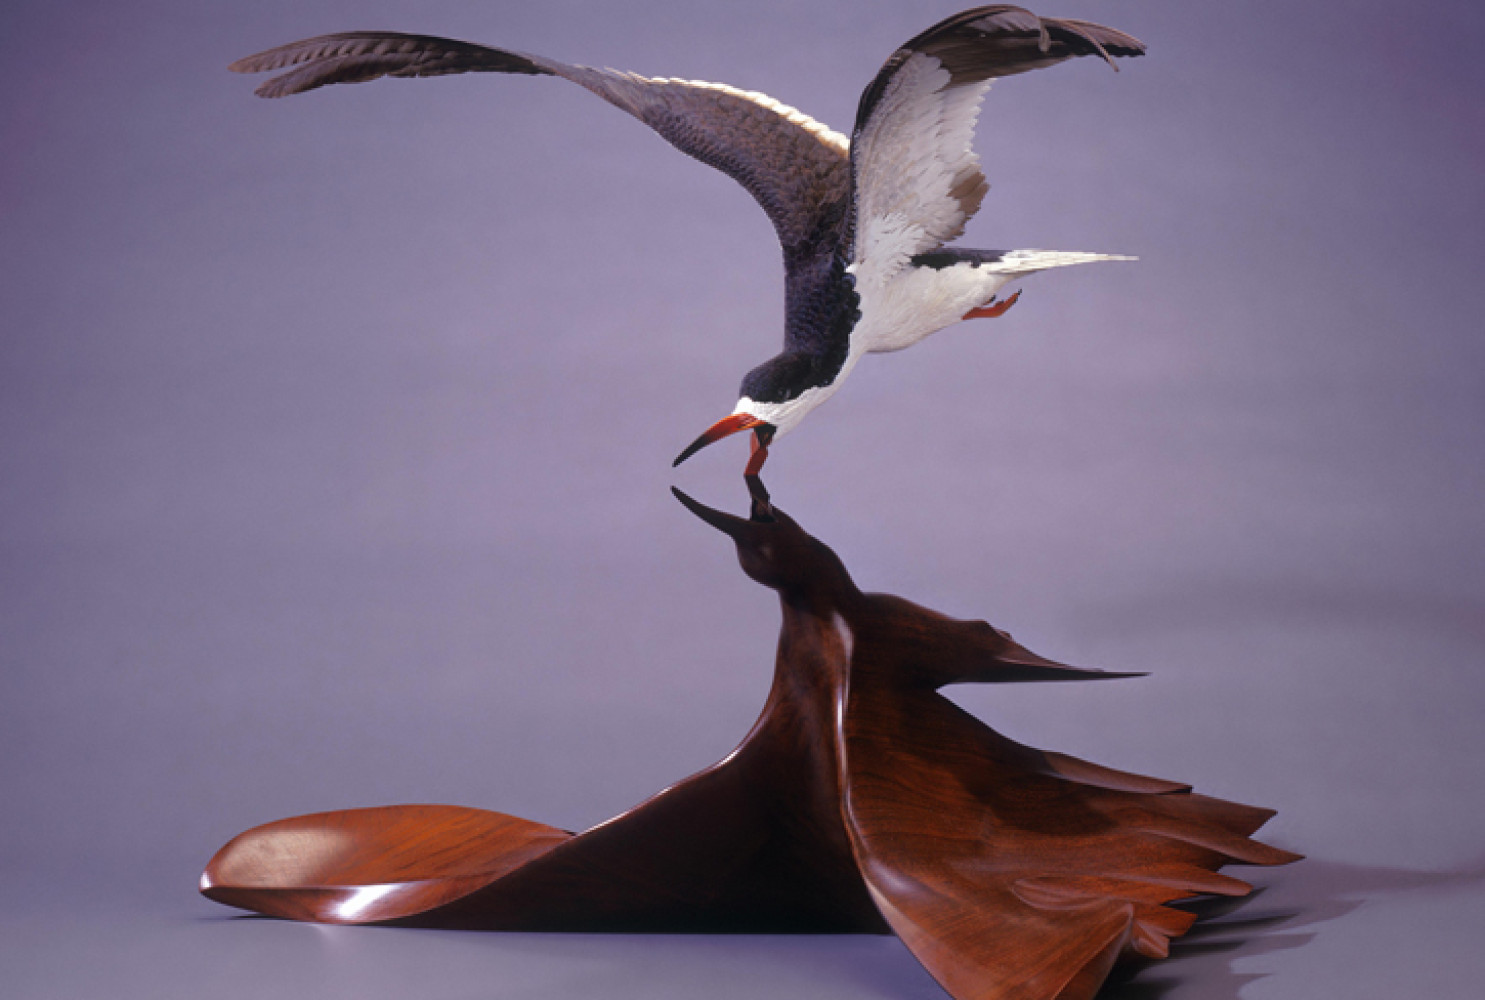 Black Skimmer, 1983, By Grainger McKoy (American, b. 1947), Basswood, walnut, polychrome and oil. On loan courtesy of The Rivers Collection. Image courtesy of the artist.
